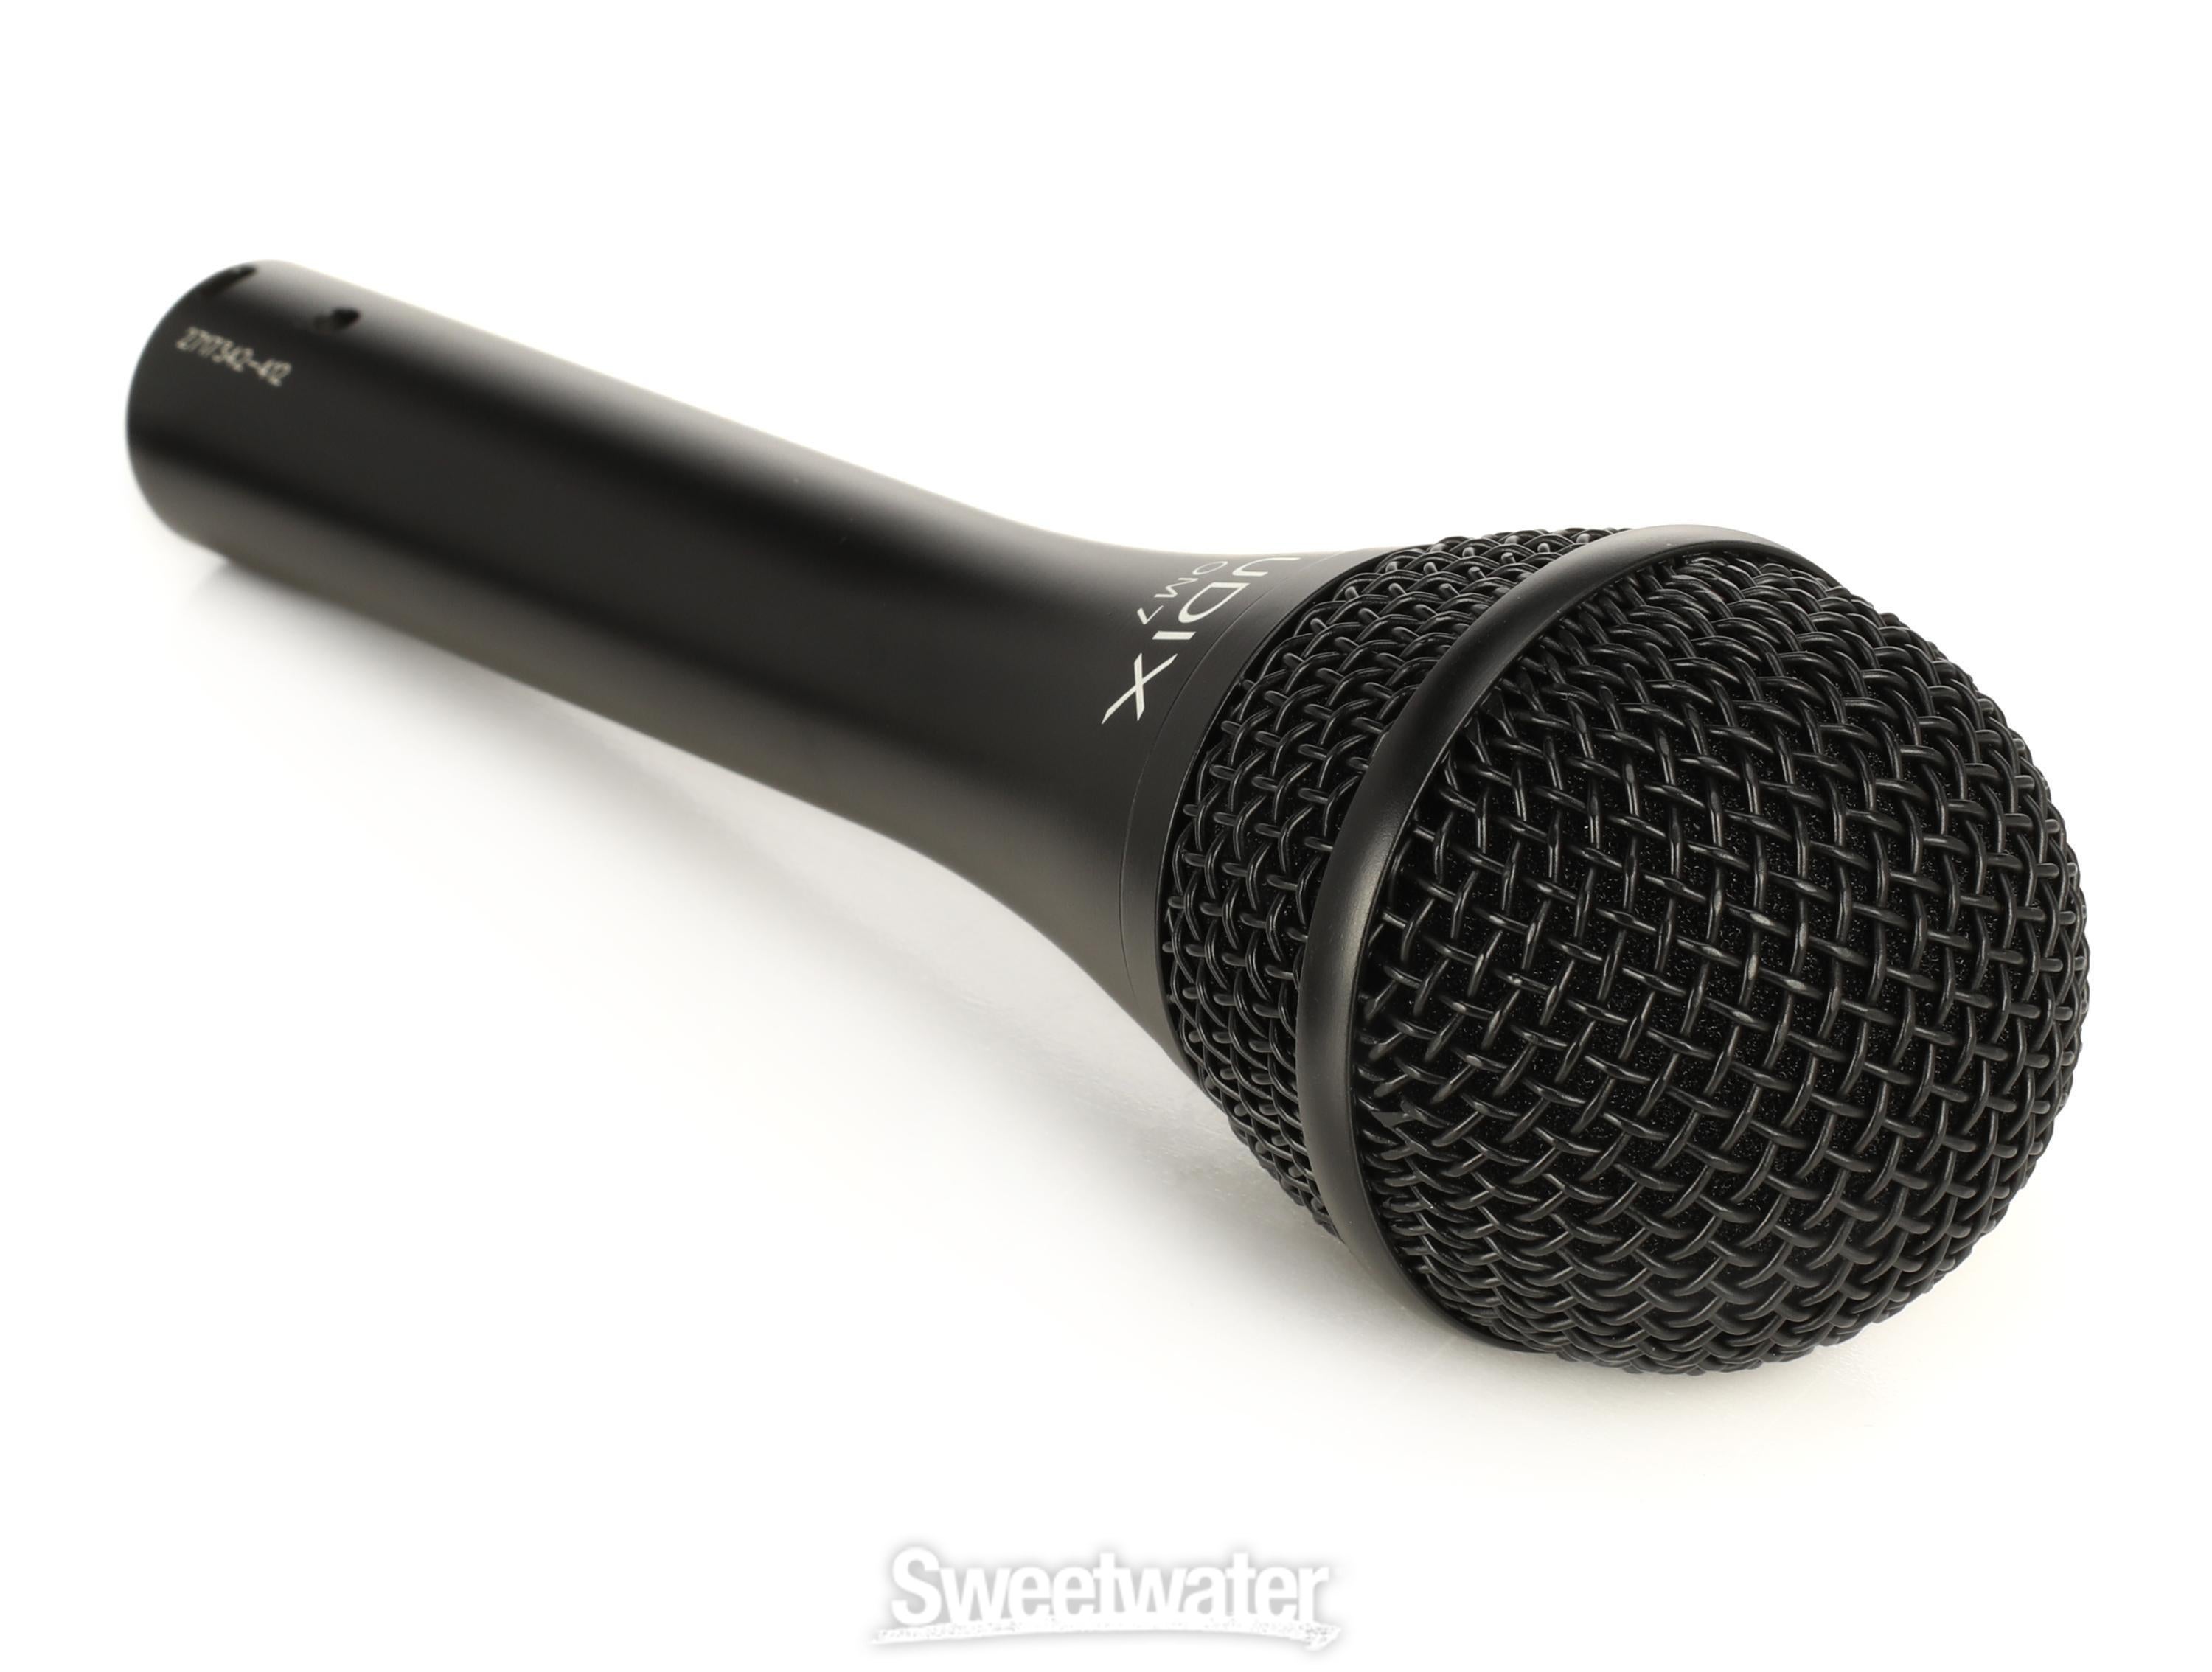 Audix OM7 Hypercardioid Dynamic Vocal Microphone | Sweetwater